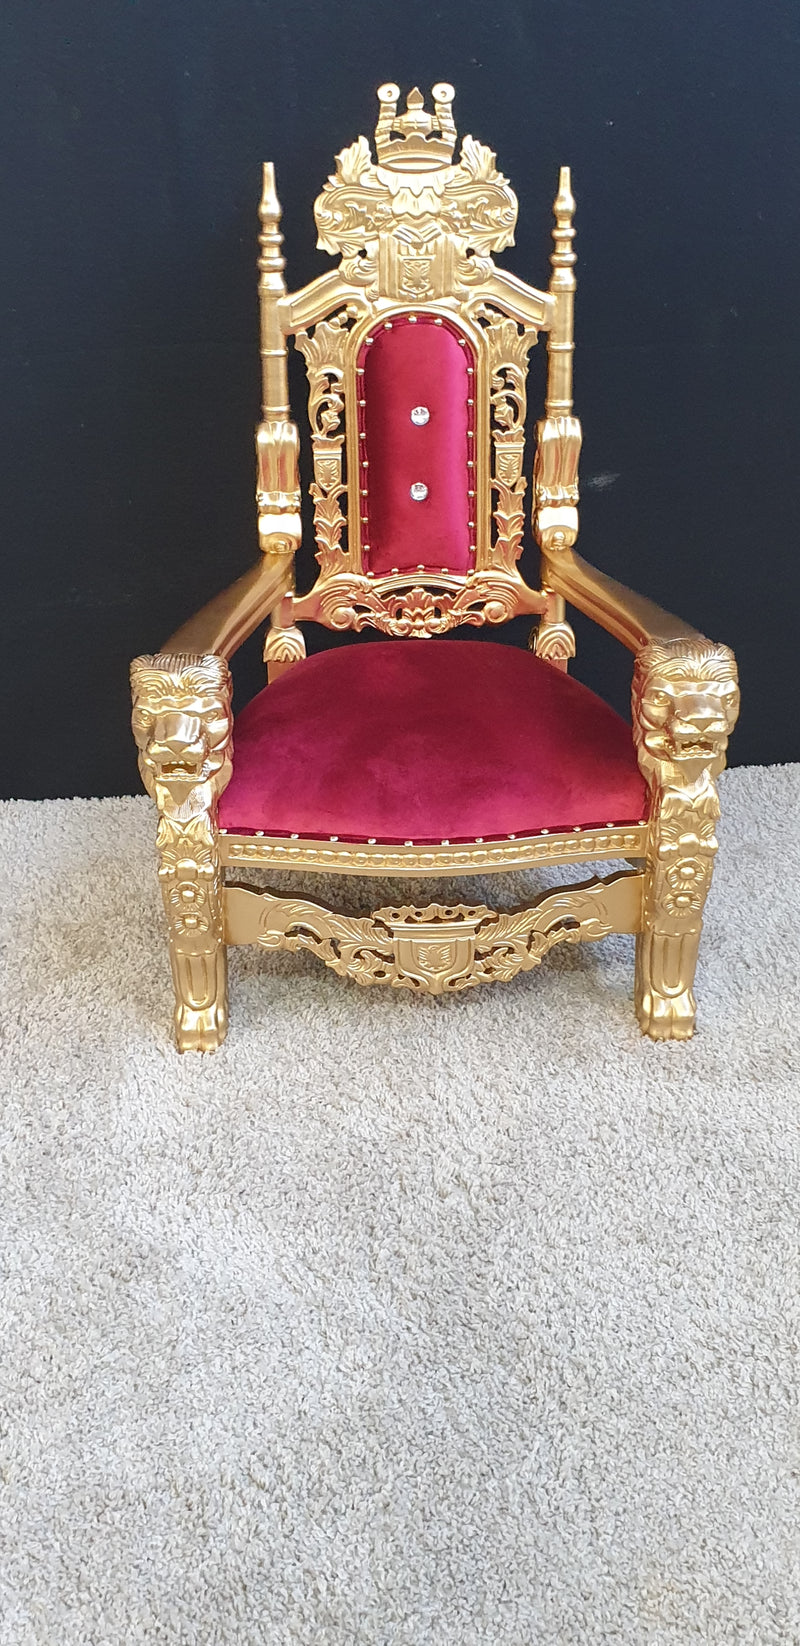 Throne Chair - Red with Gold Frame